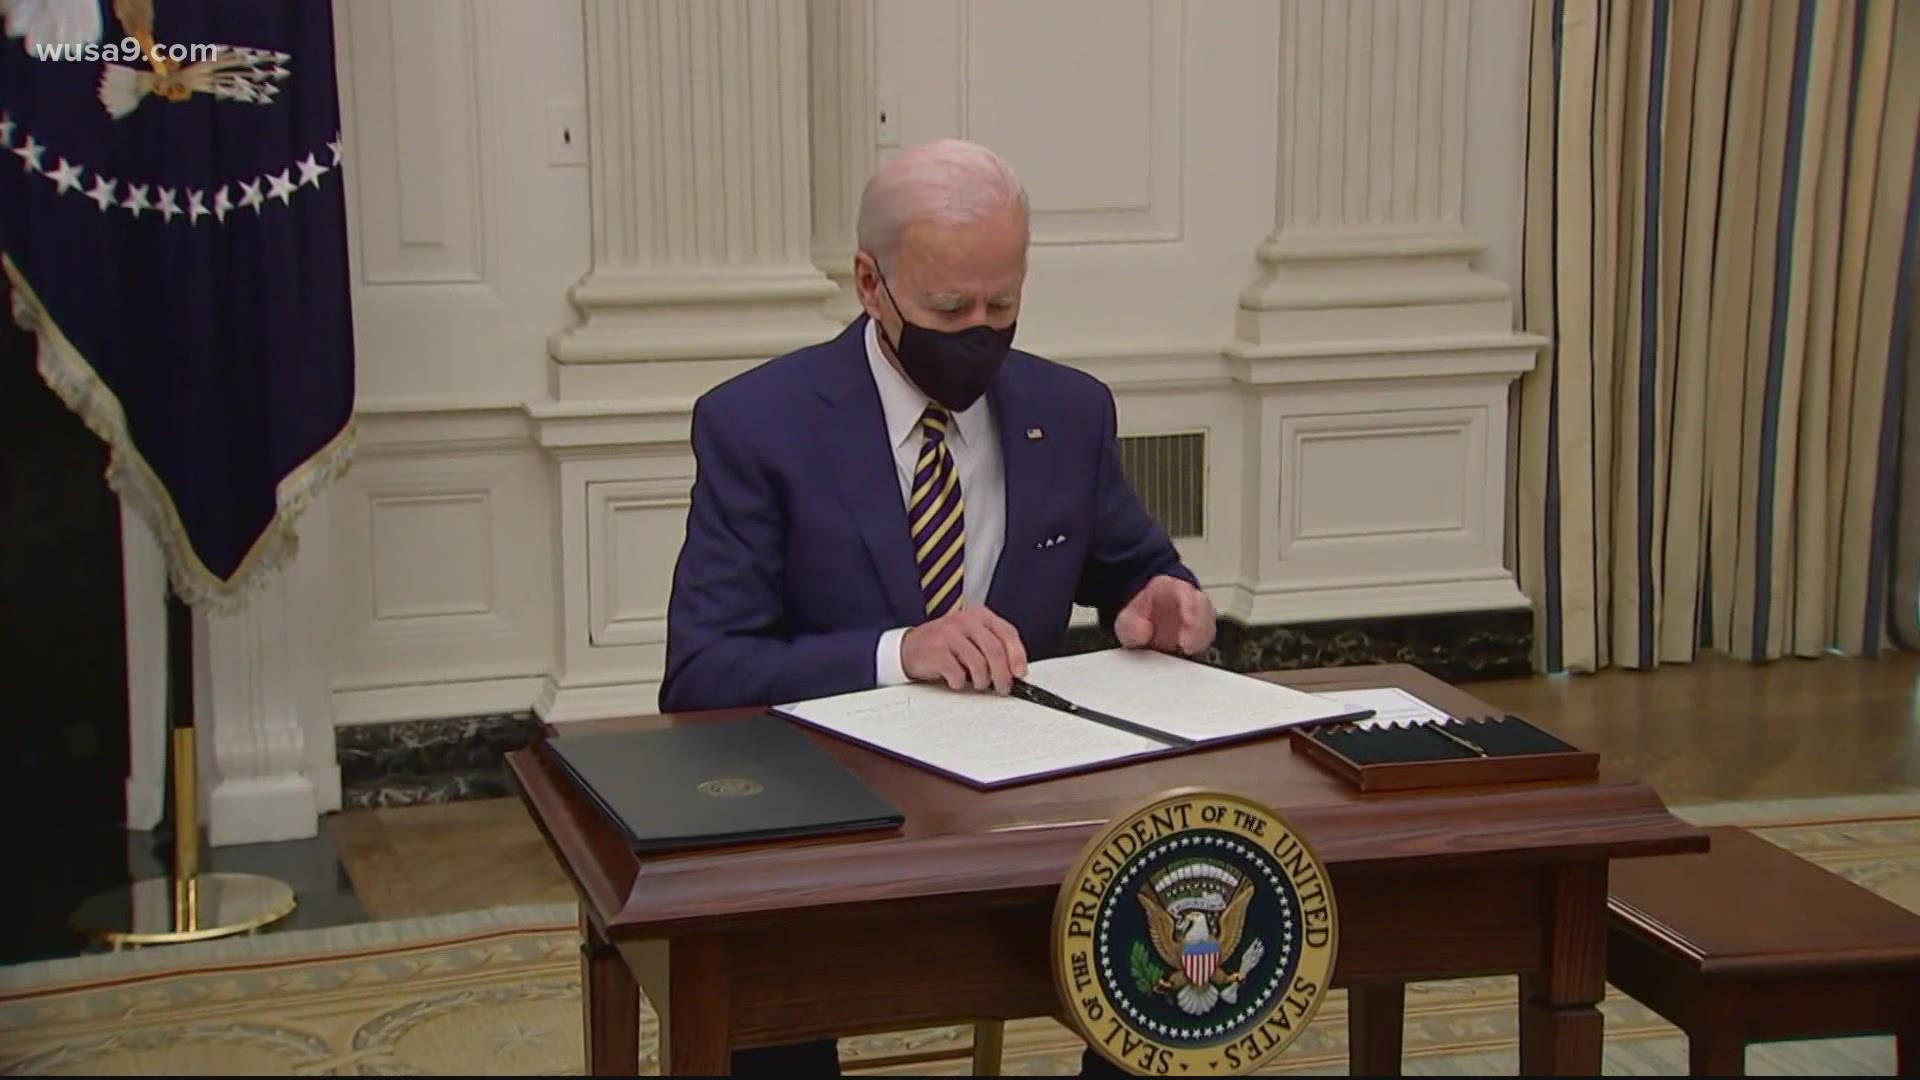 President Biden's orders build on his other efforts to help those struggling during the economic and coronavirus crises